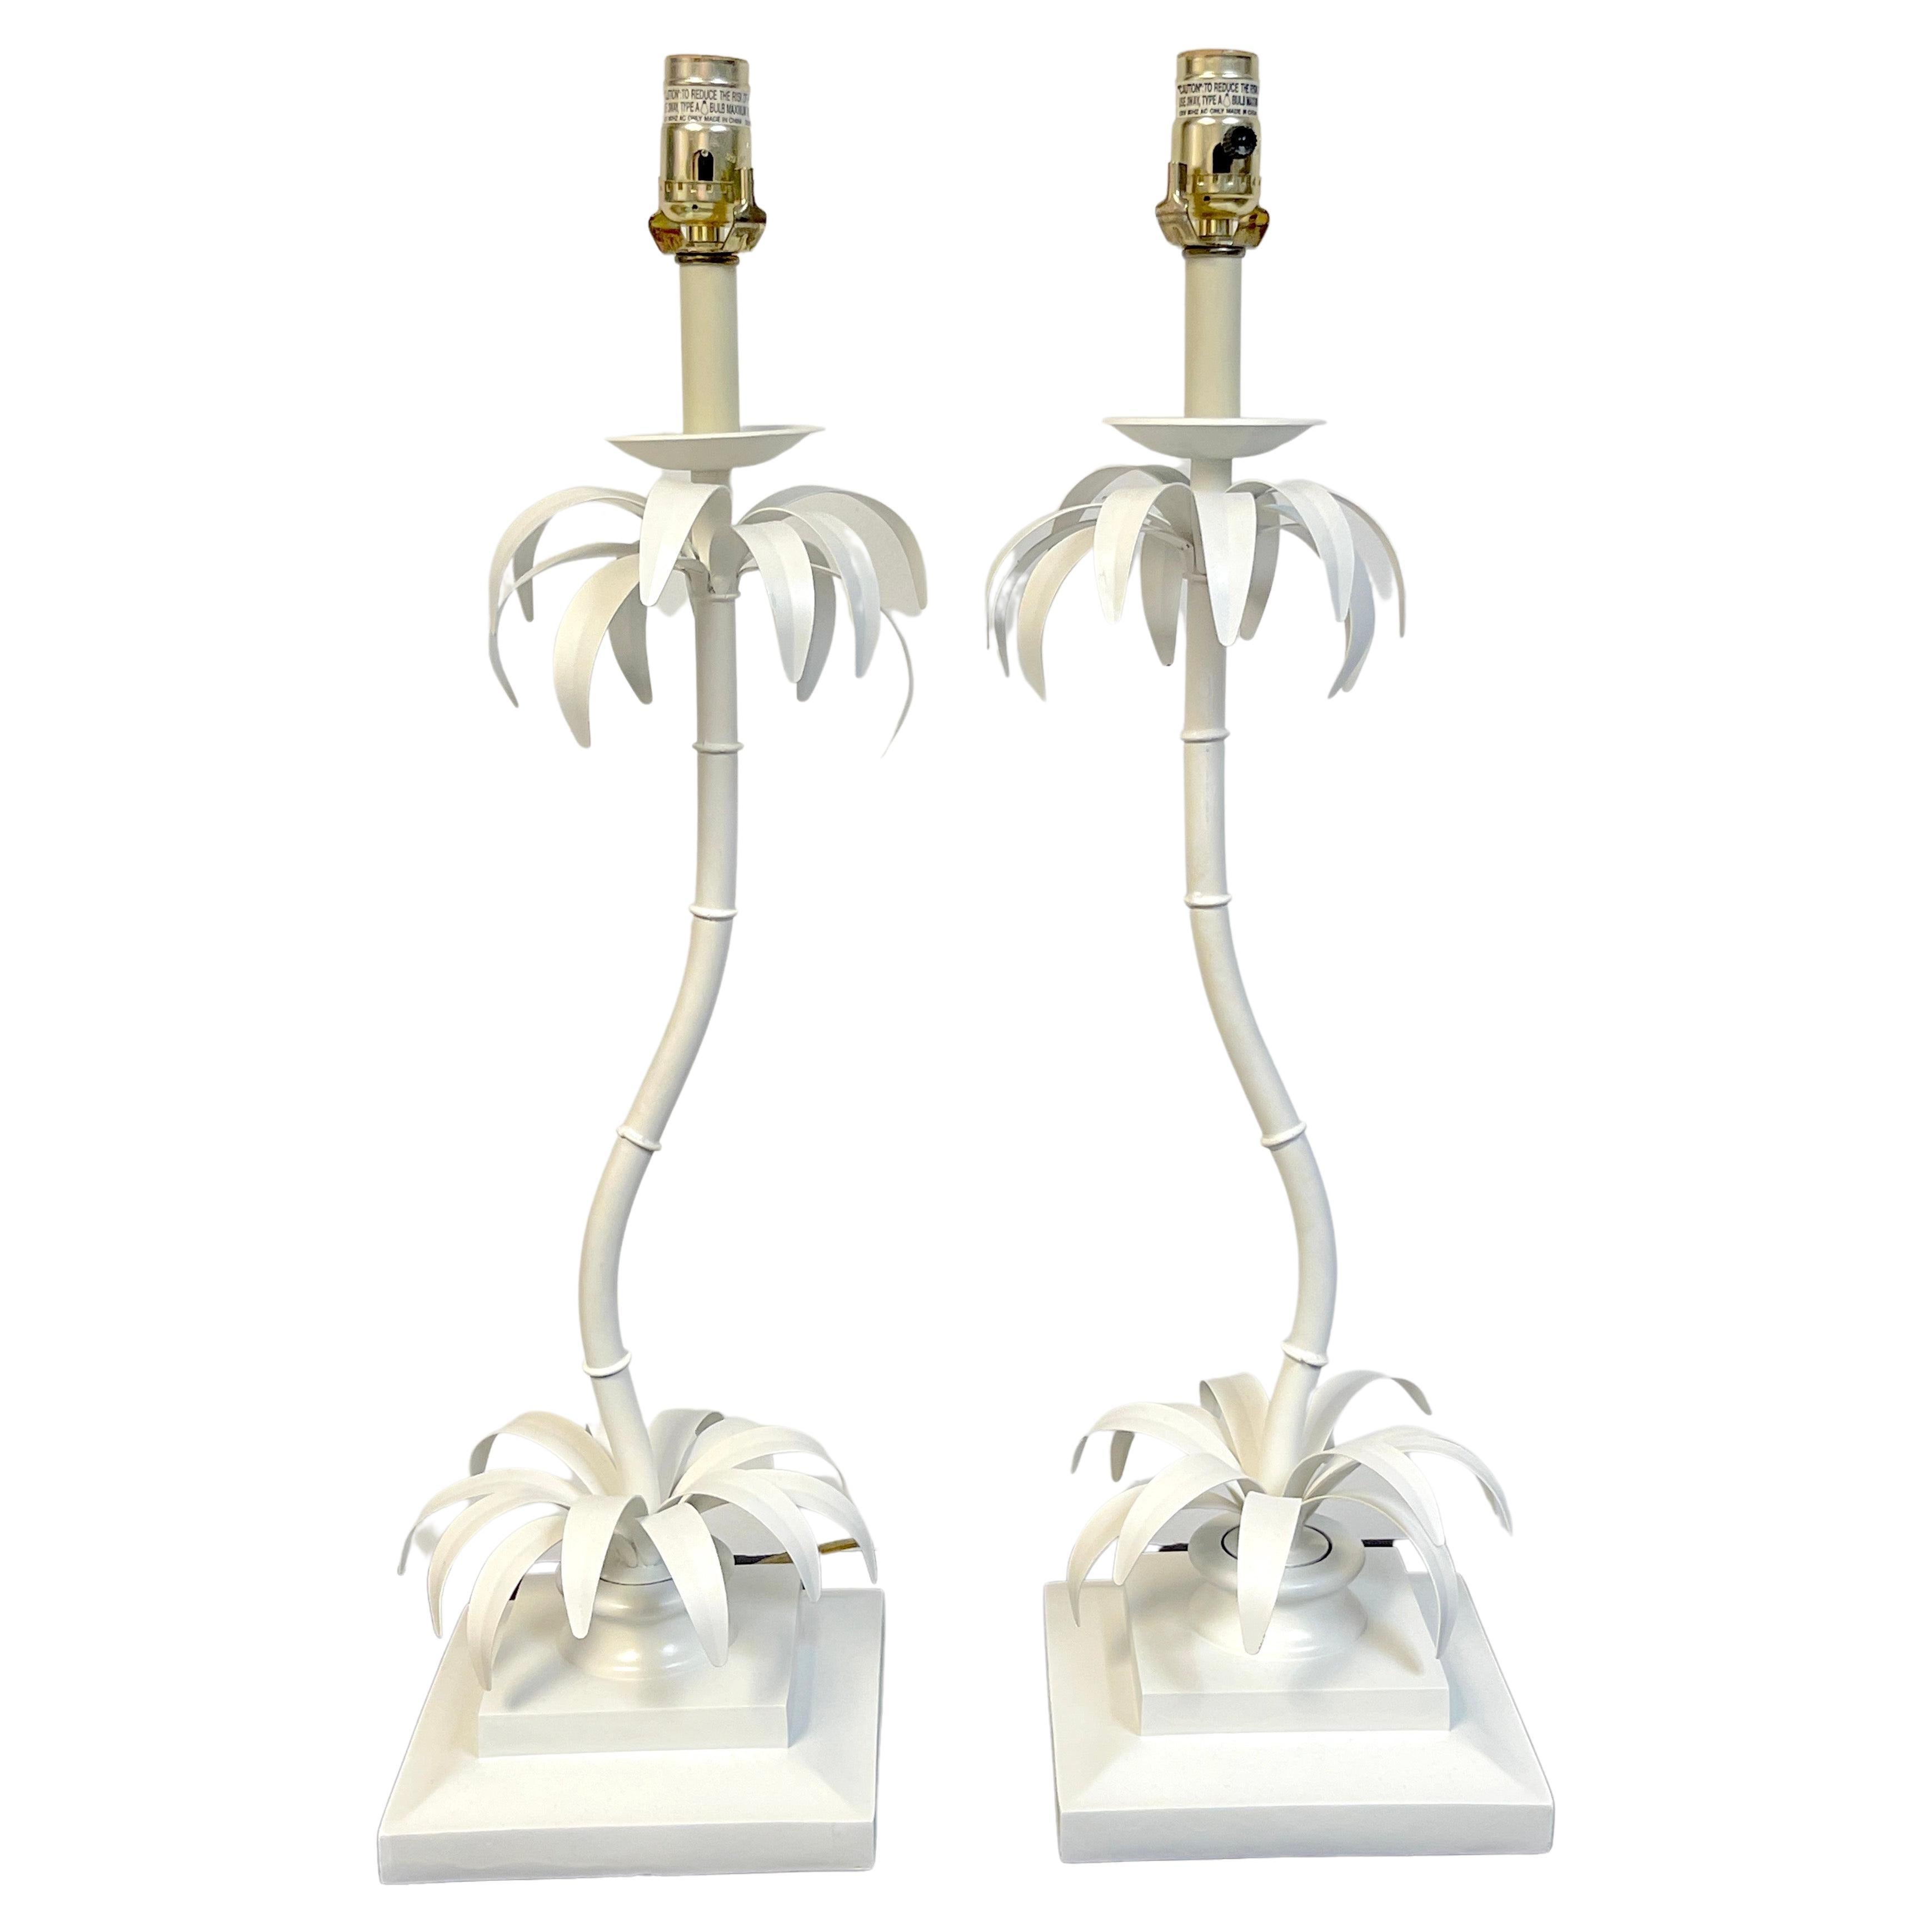 Pair of Hollywood Regency White Lacquered Contoured Palm Tree Lamps